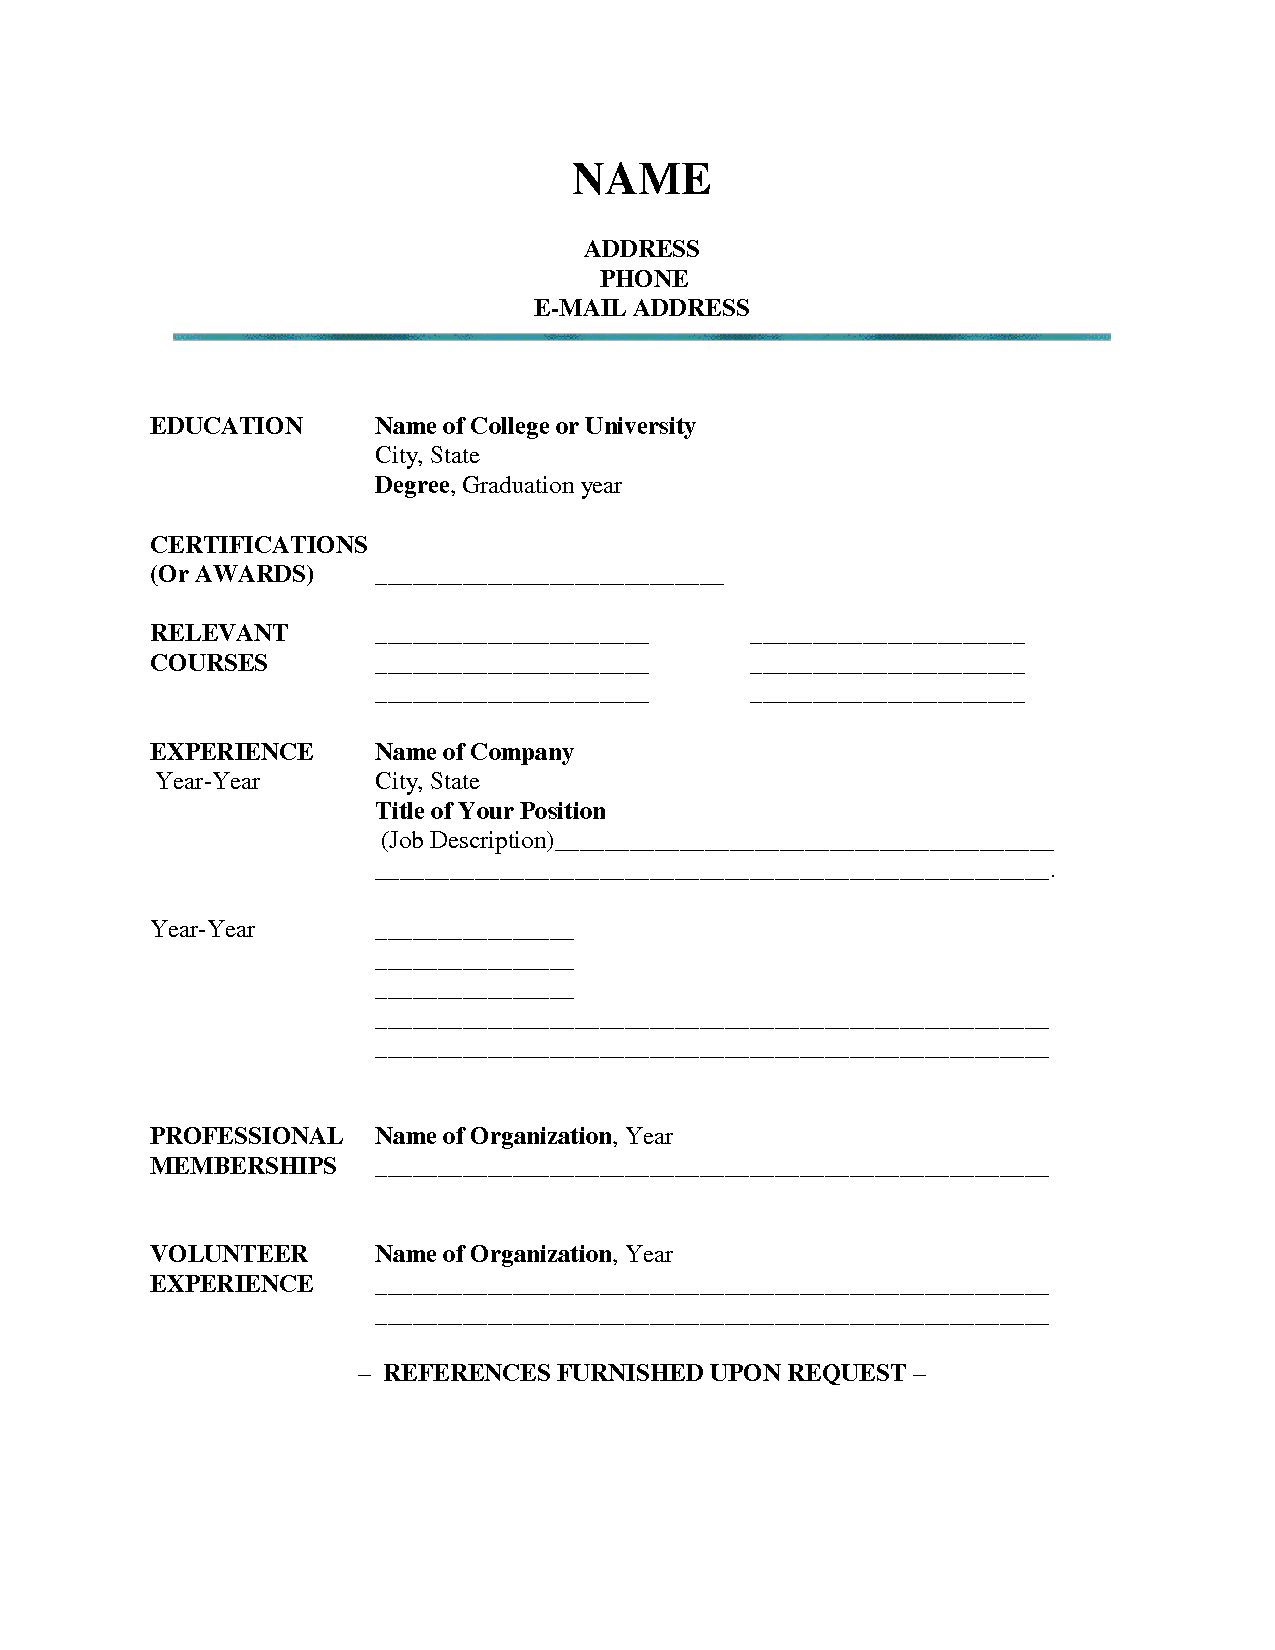 resume-template-for-microsoft-word-cover-letter-cover-letter-for-blank